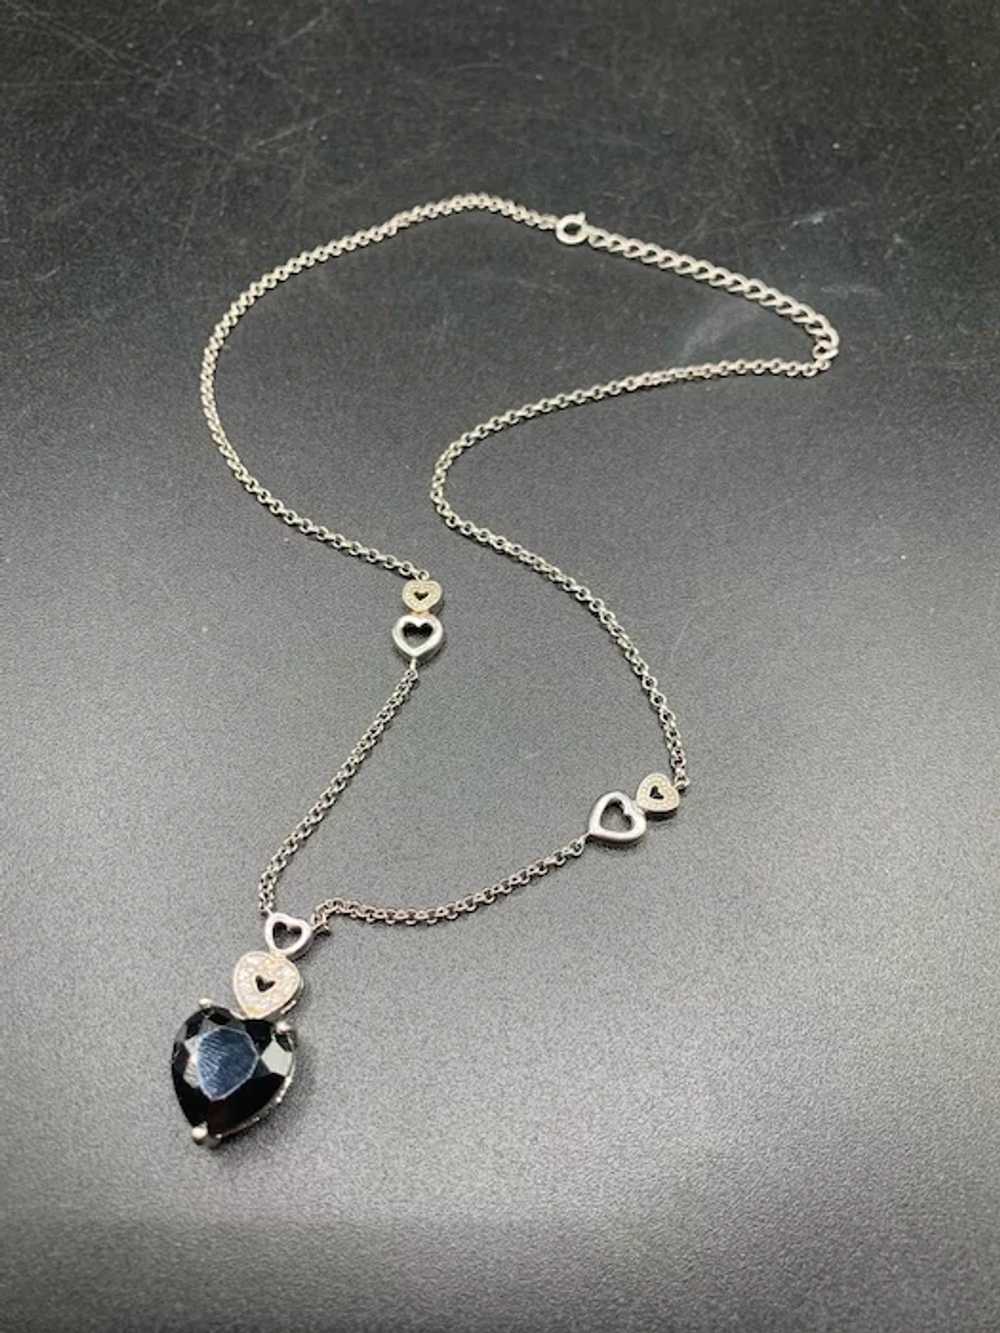 Hematite Heart Necklace Sterling Silver Chain Fac… - image 6